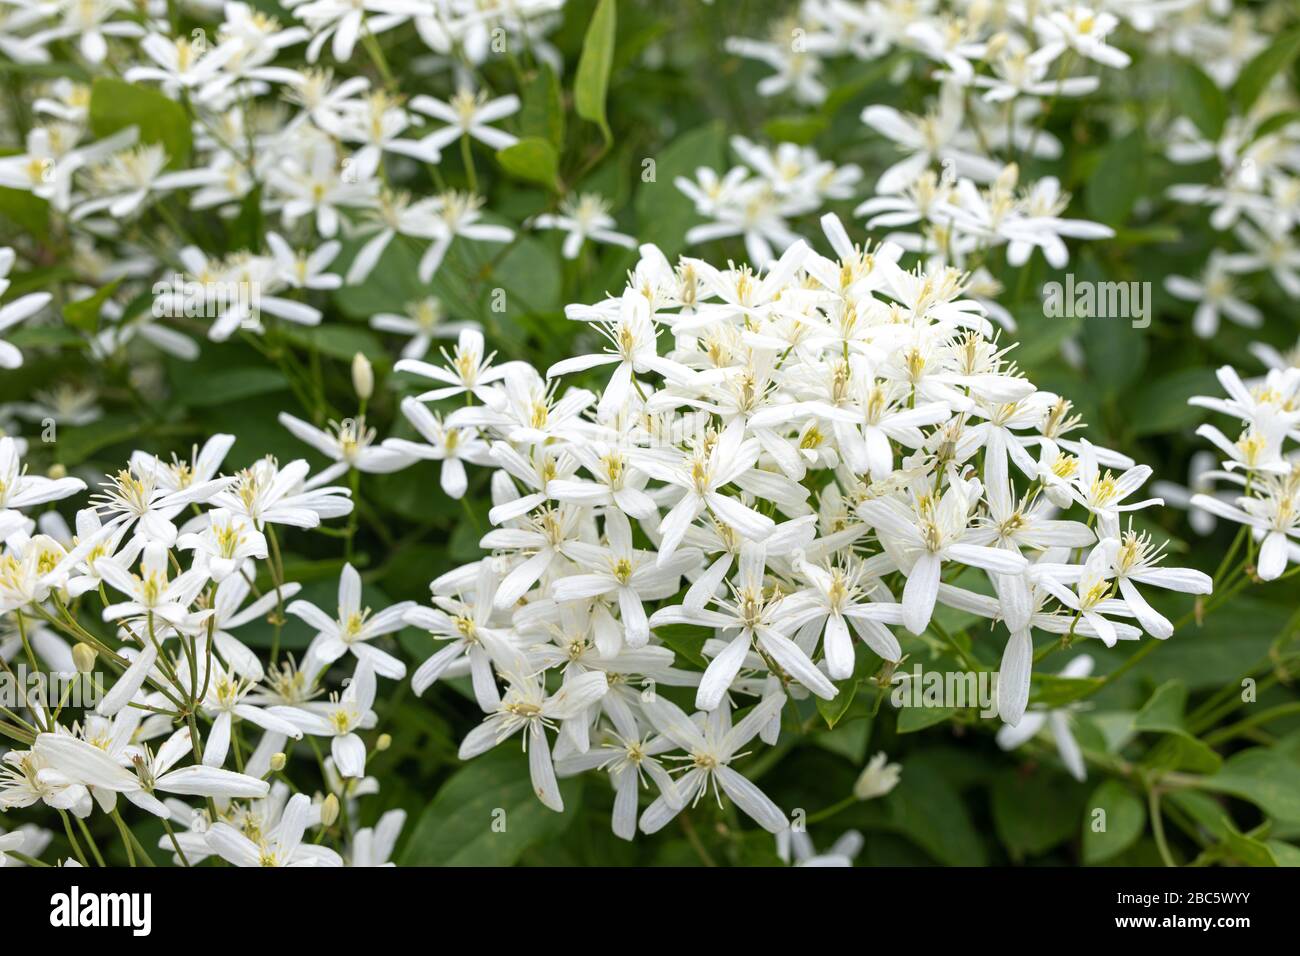 Small white fragrant flowers of Clematis recta or Clematis flammula or clematis Manchurian in summer garden closeup. Flowery natural background. Stock Photo